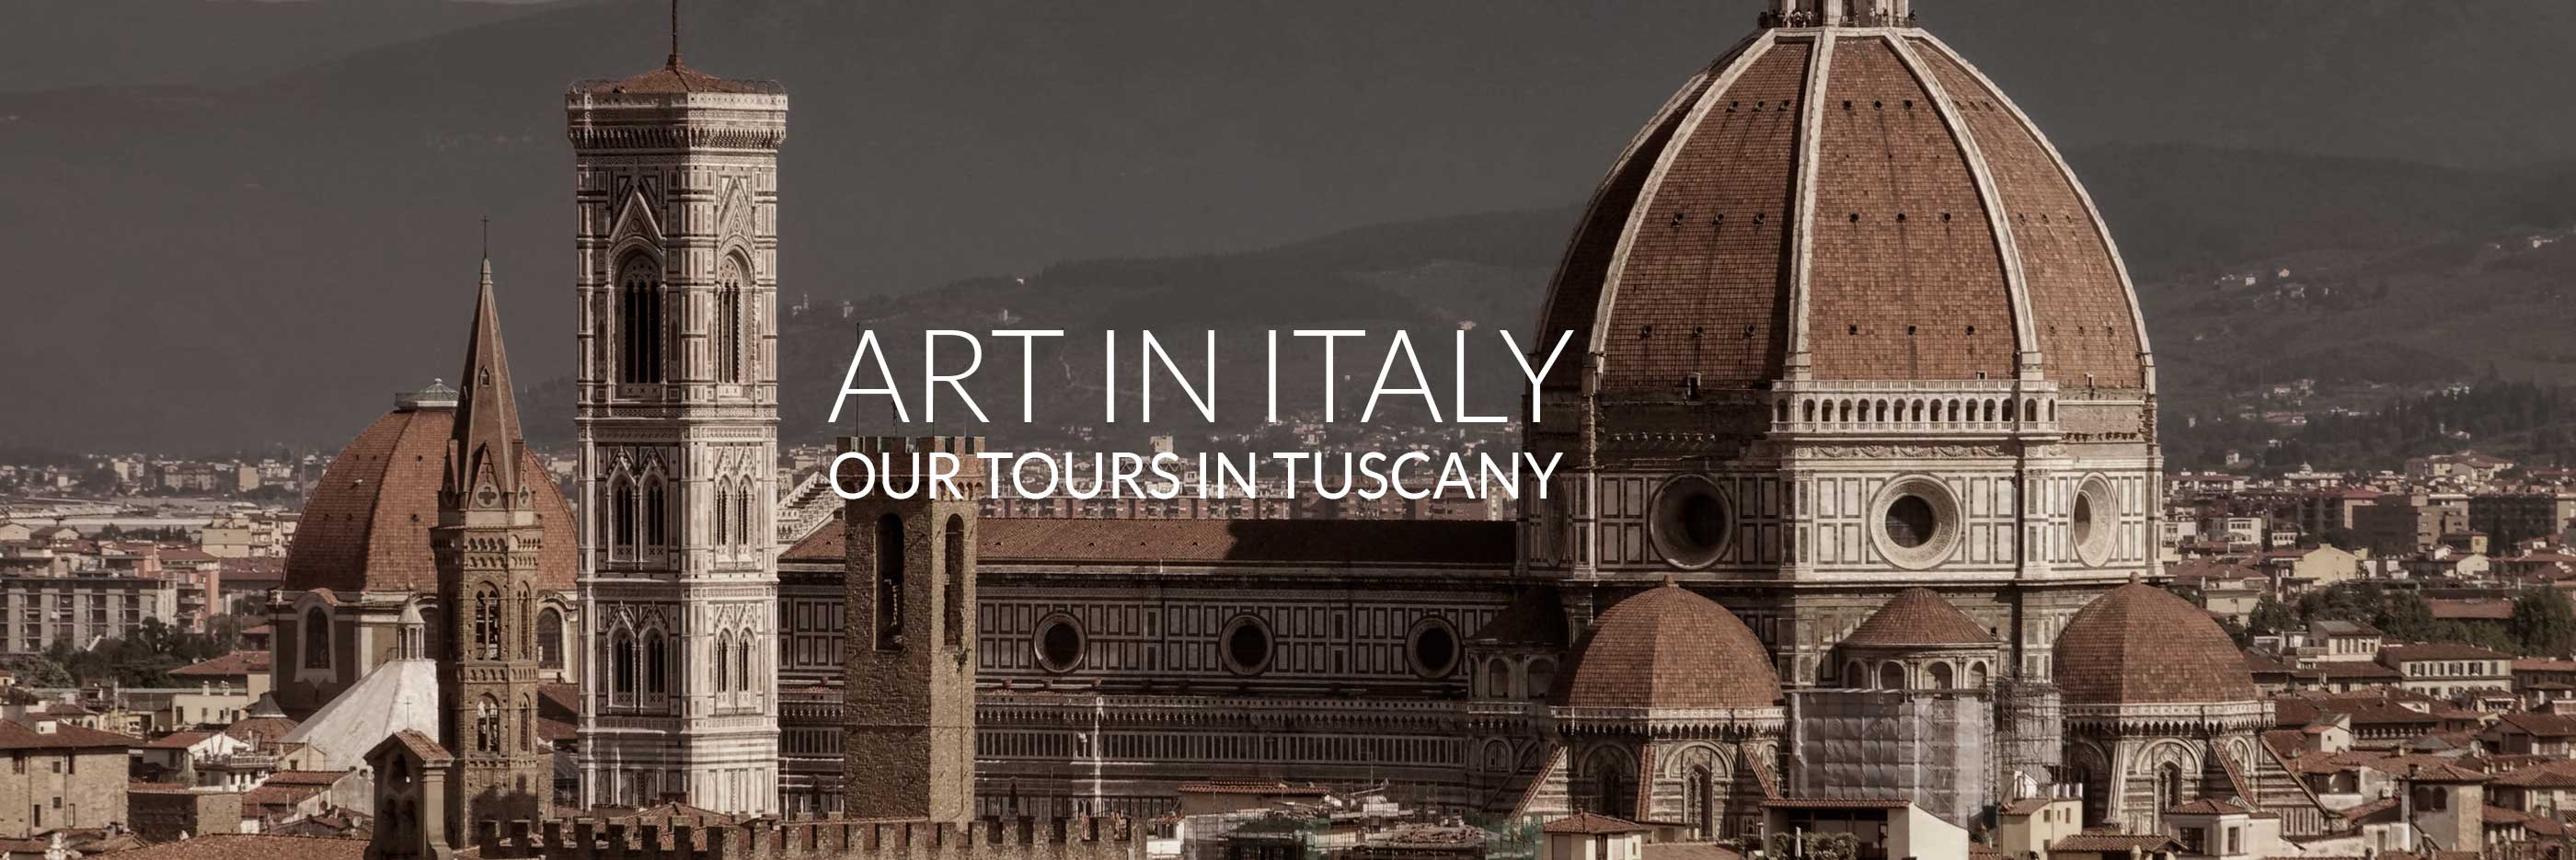 OUR TOURS IN TUSCANY